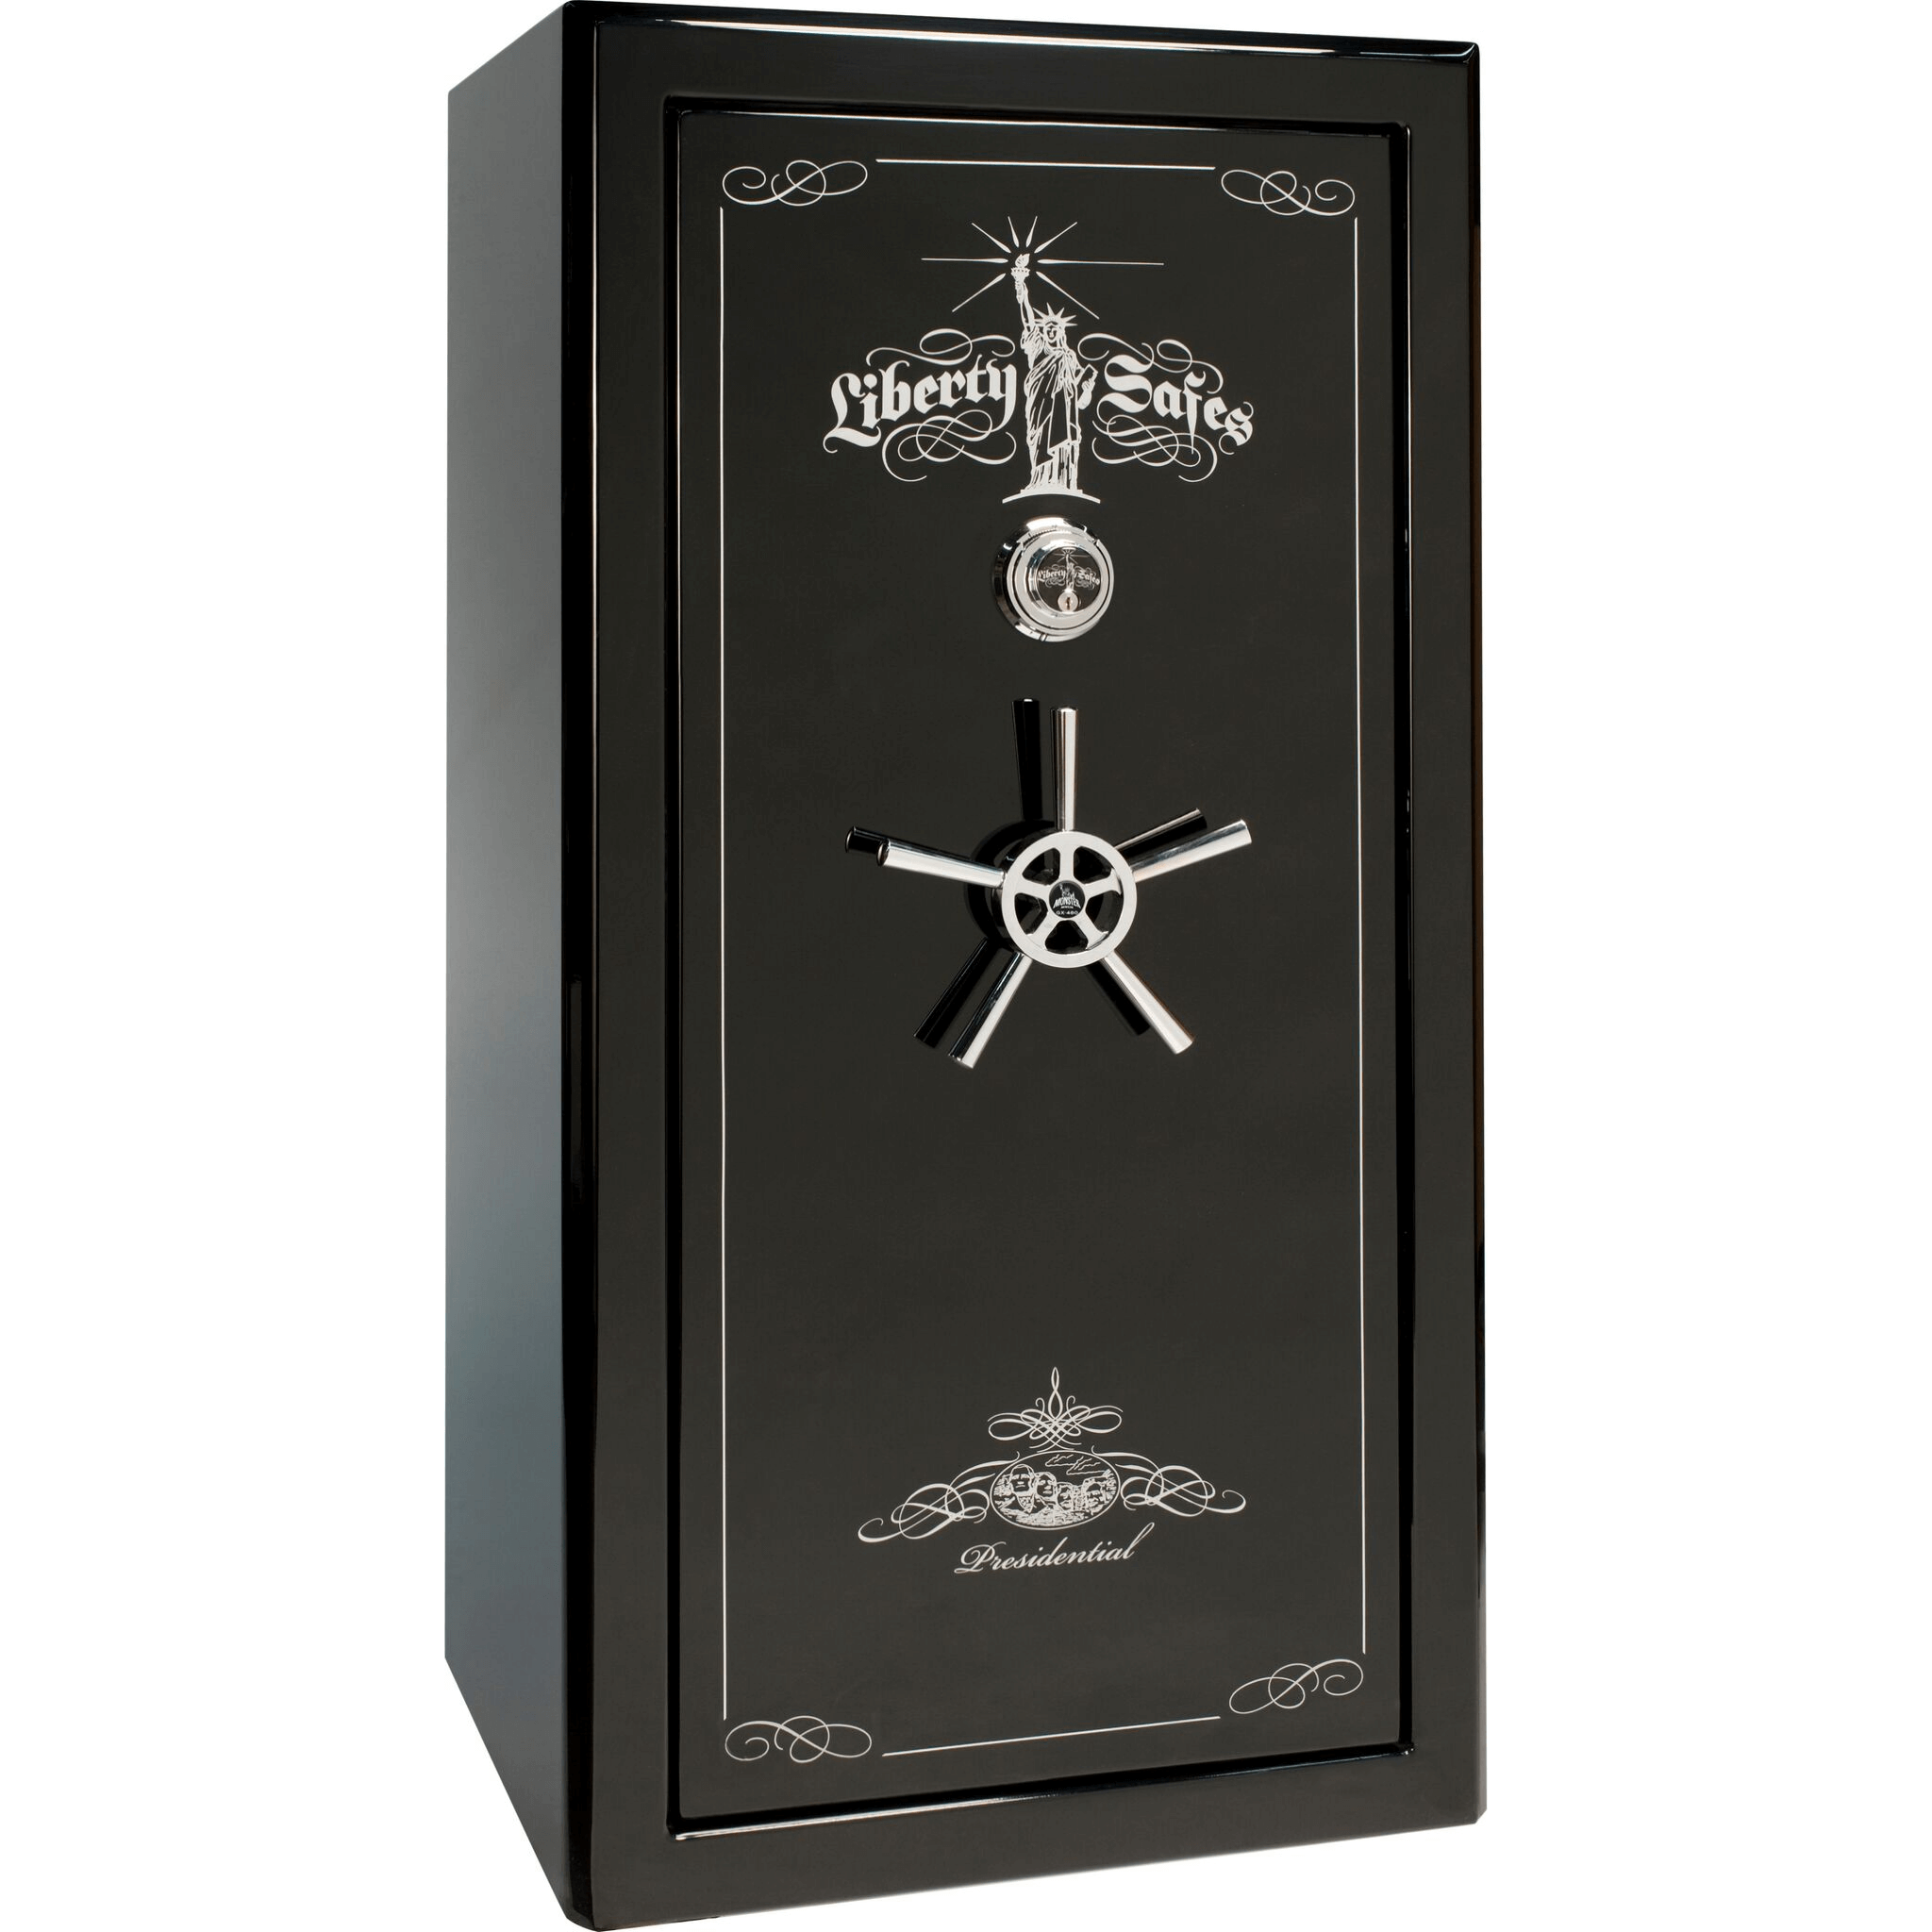 Presidential Series | Level 8 Security | 2.5 Hours Fire Protection | 25 | Dimensions: 60.5"(H) x 30.25"(W) x 28.5"(D) | Black Gloss Chrome Hardware | Mechanical Lock